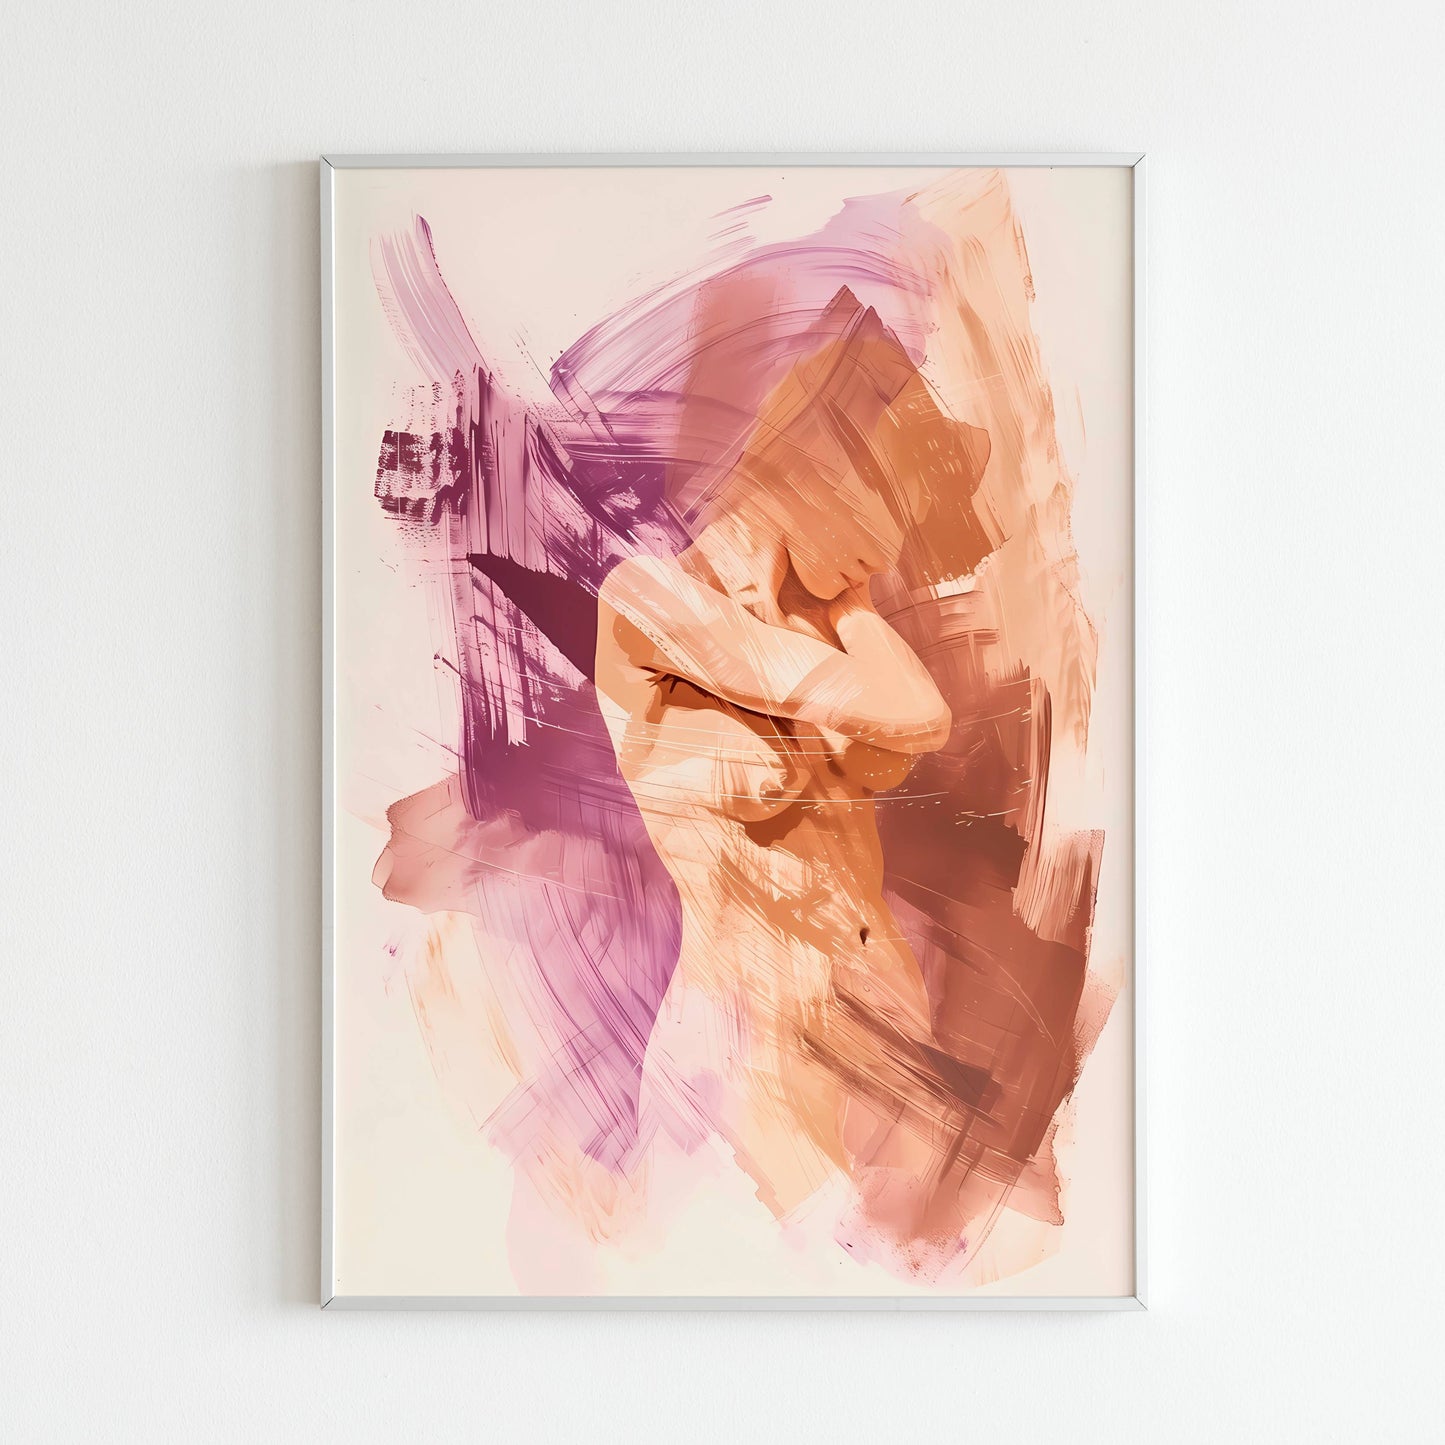 Woman Body Abstract - Printed Wall Art / Poster. This unique and abstract poster depicts the female form in a modern style. Arrives ready to hang.